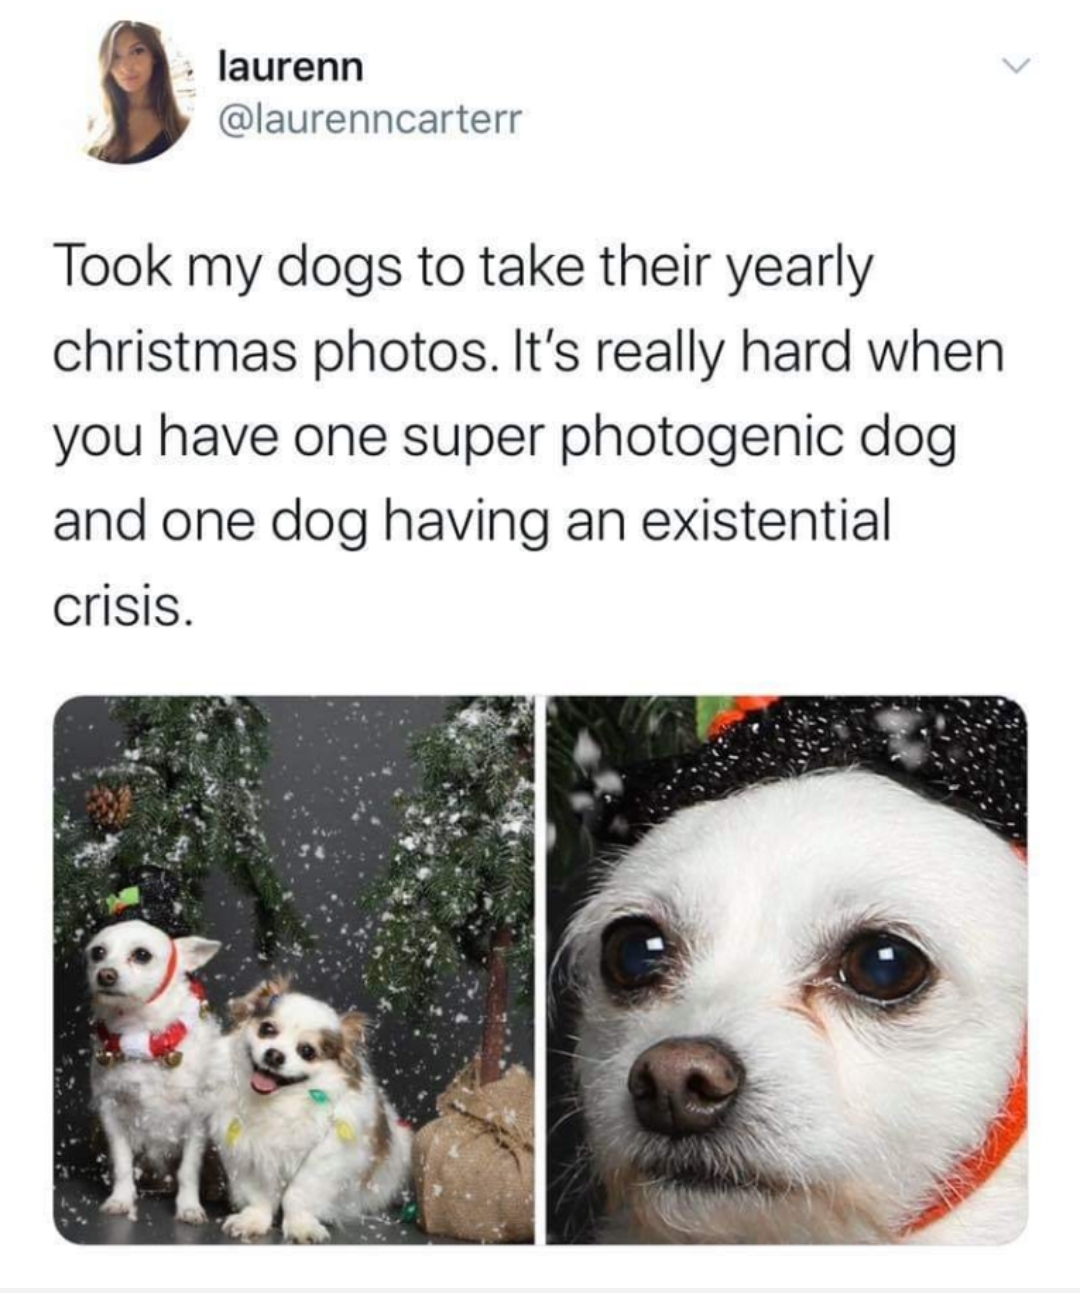 photo caption - laurenn Took my dogs to take their yearly christmas photos. It's really hard when you have one super photogenic dog and one dog having an existential crisis.